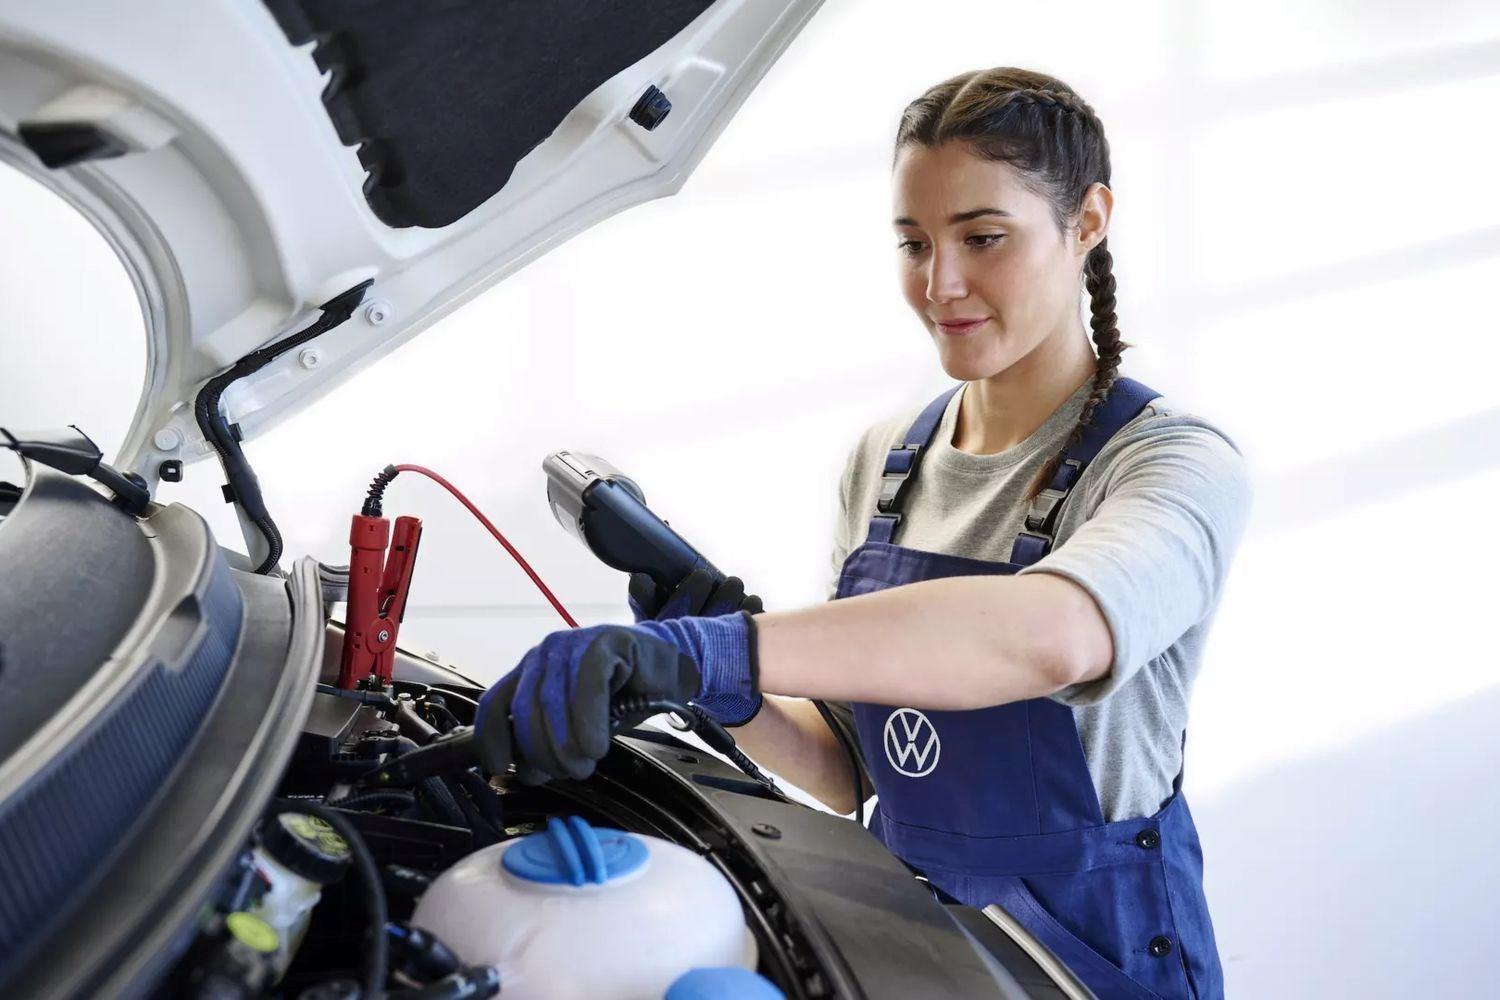 Volkswagen Technician clamps battery while holding a hand-held light during service at Volkswagen Approved Repair Centre at Agnew Van Centre, Mallusk